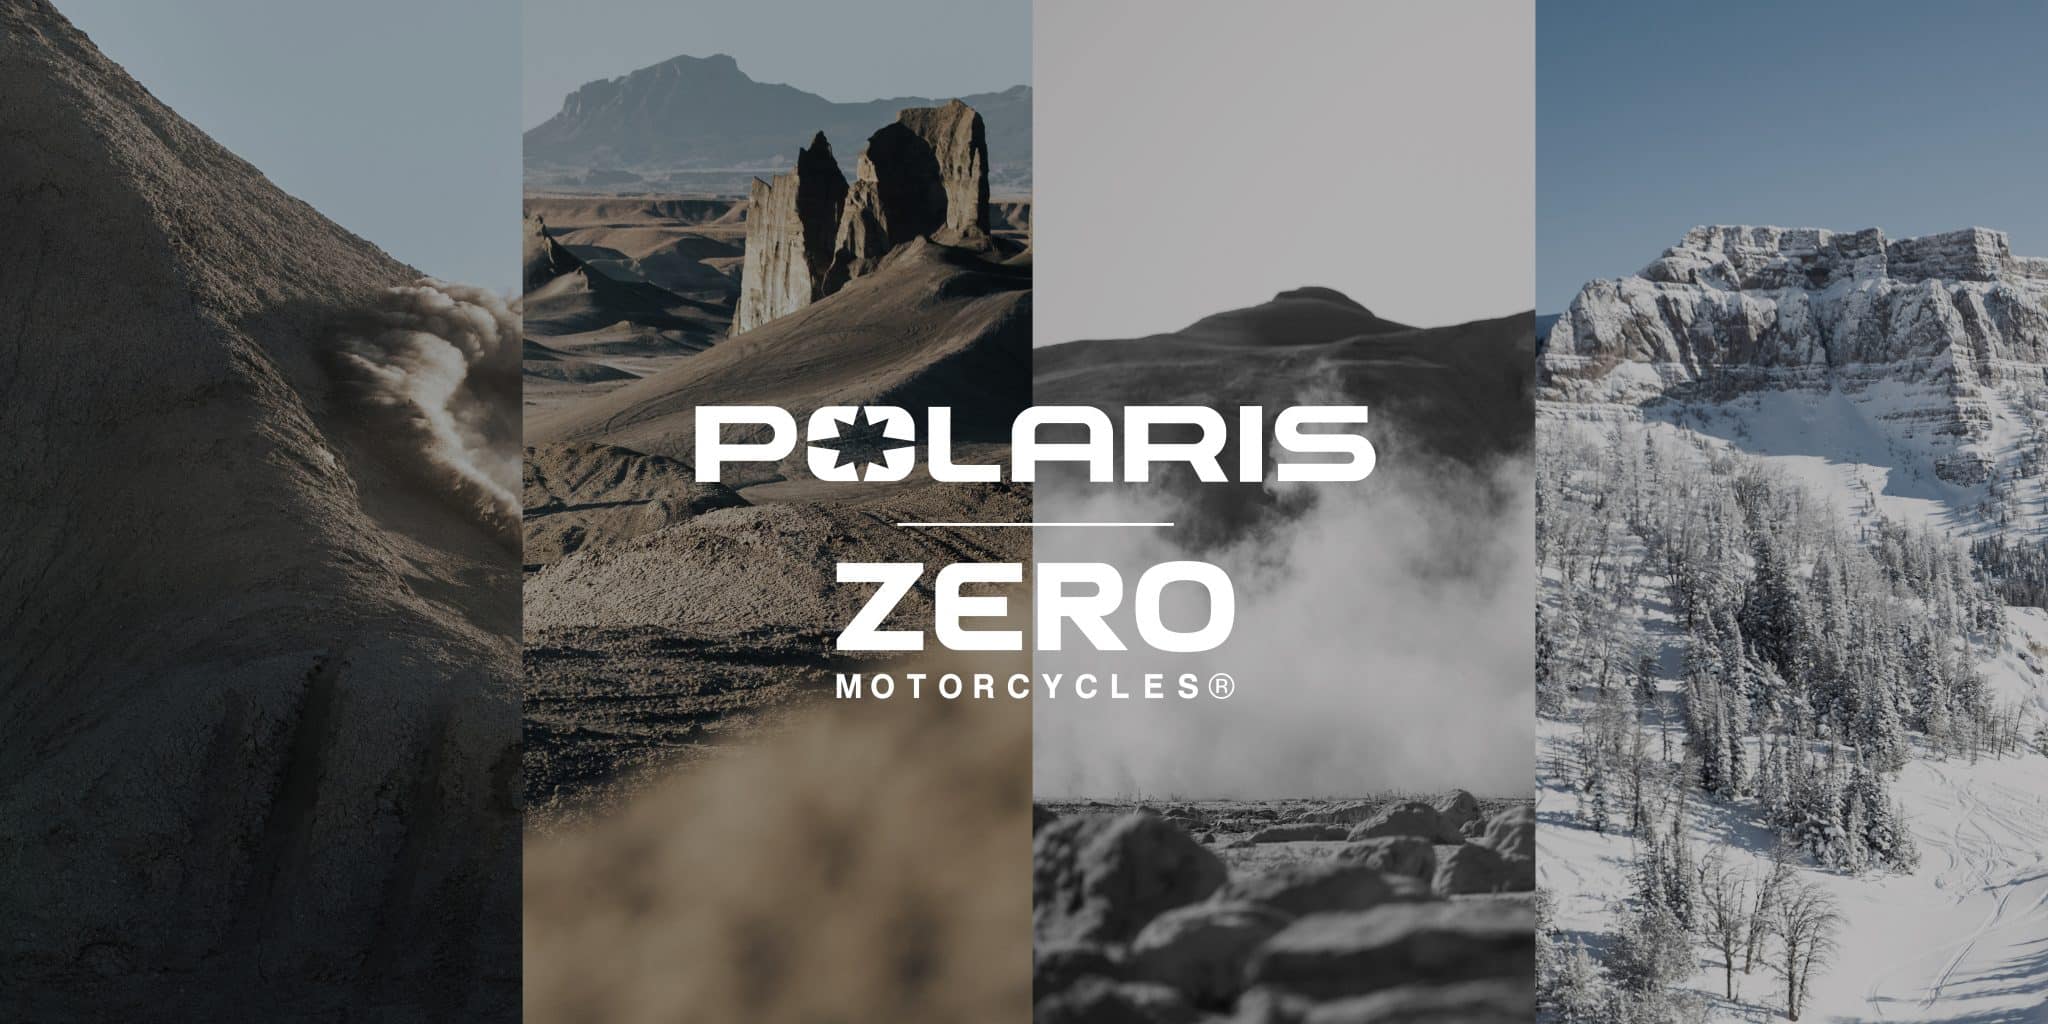 Polaris and Zero Motorcycles strategic partnership co-develop electric vehicles snowmobiles motorcycles side-by-sides RZR